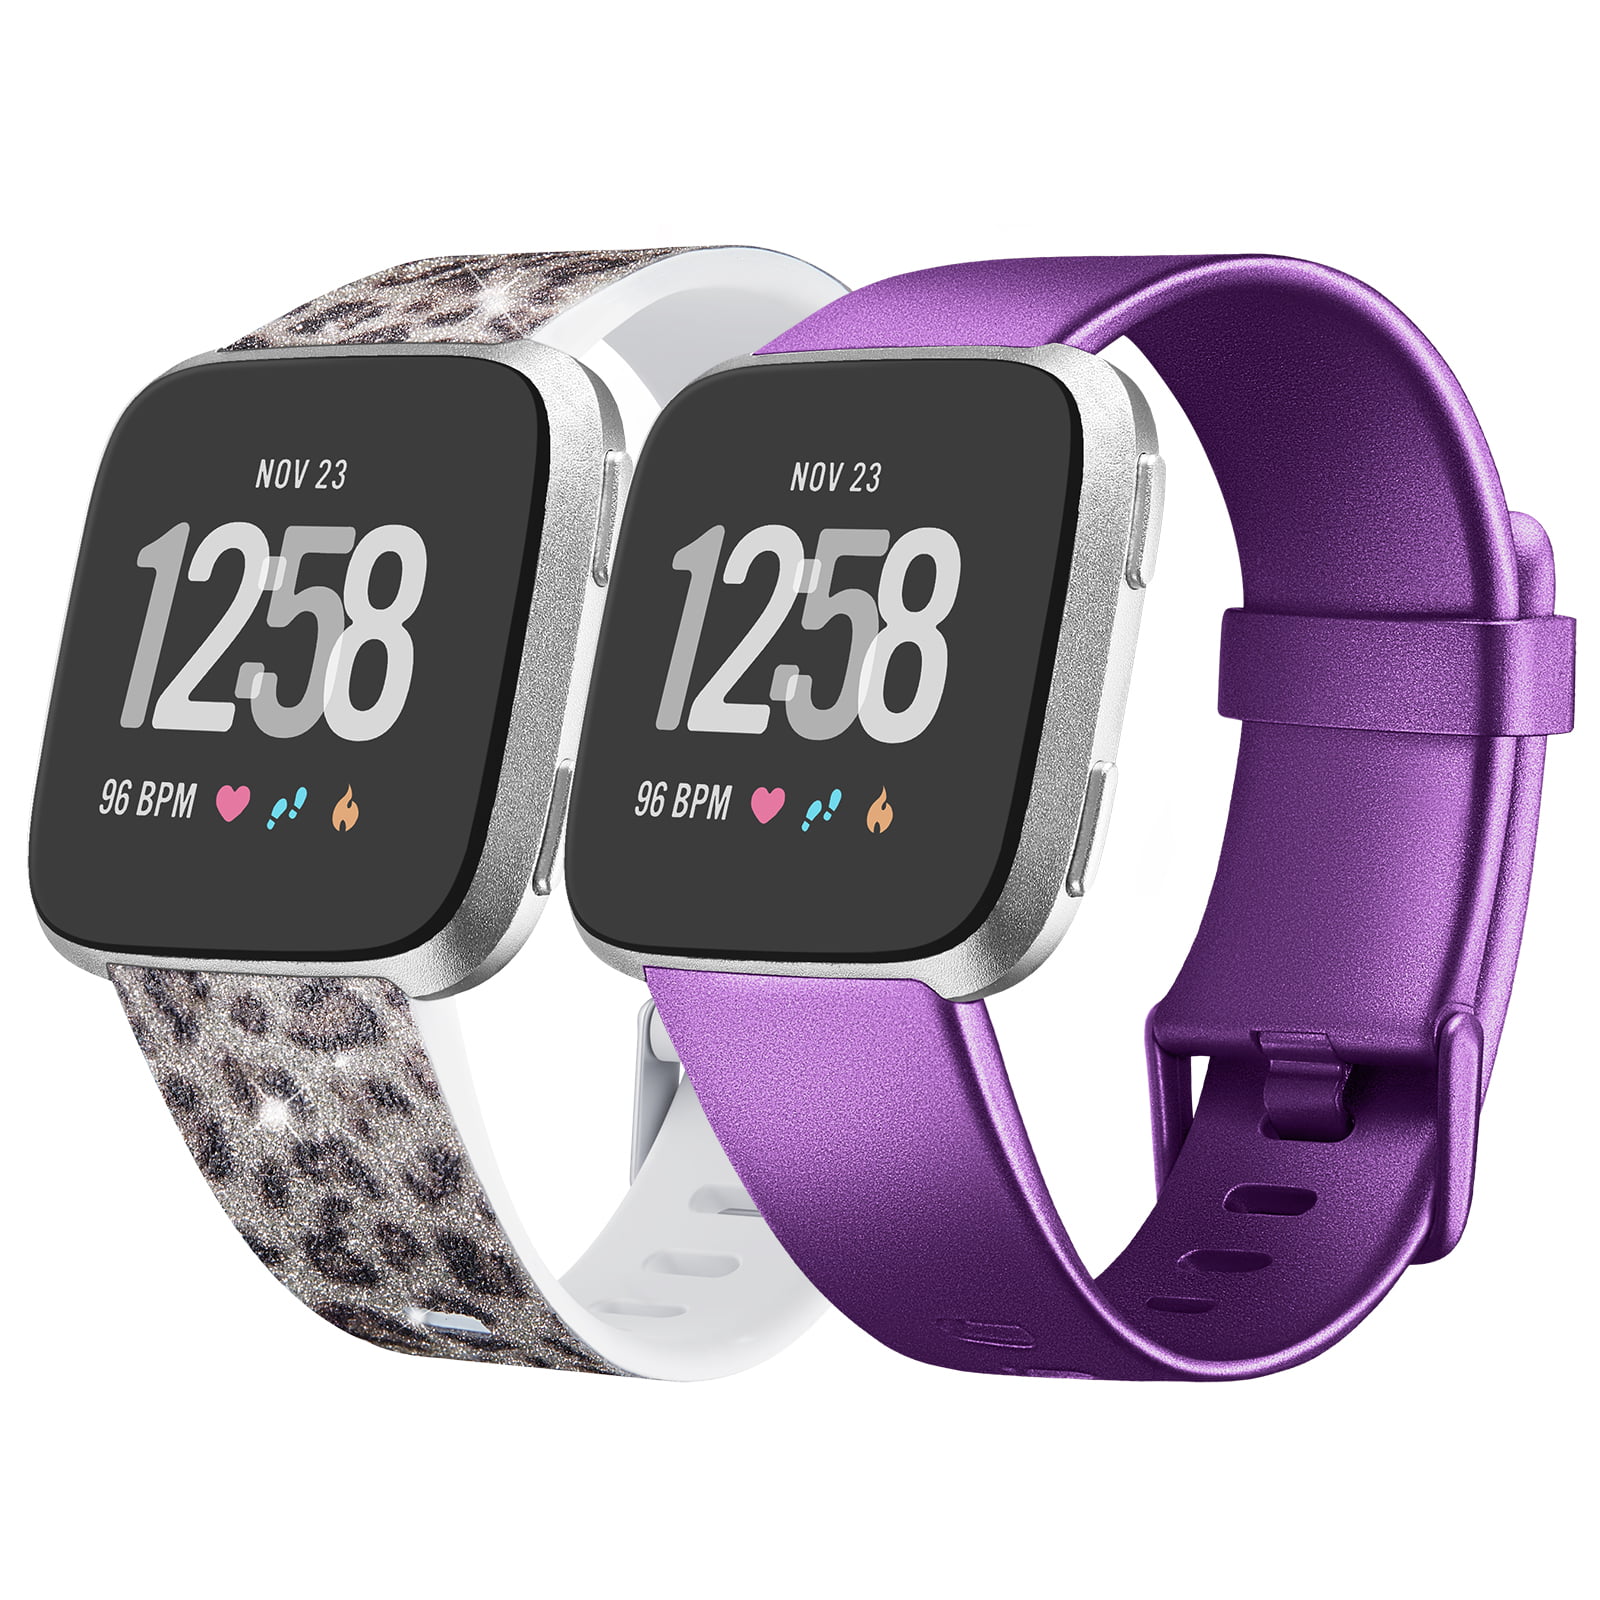 Bands For Fitbit Versa 2 Versa Lite Versa Special Edition,Narrow Floral Silicone 